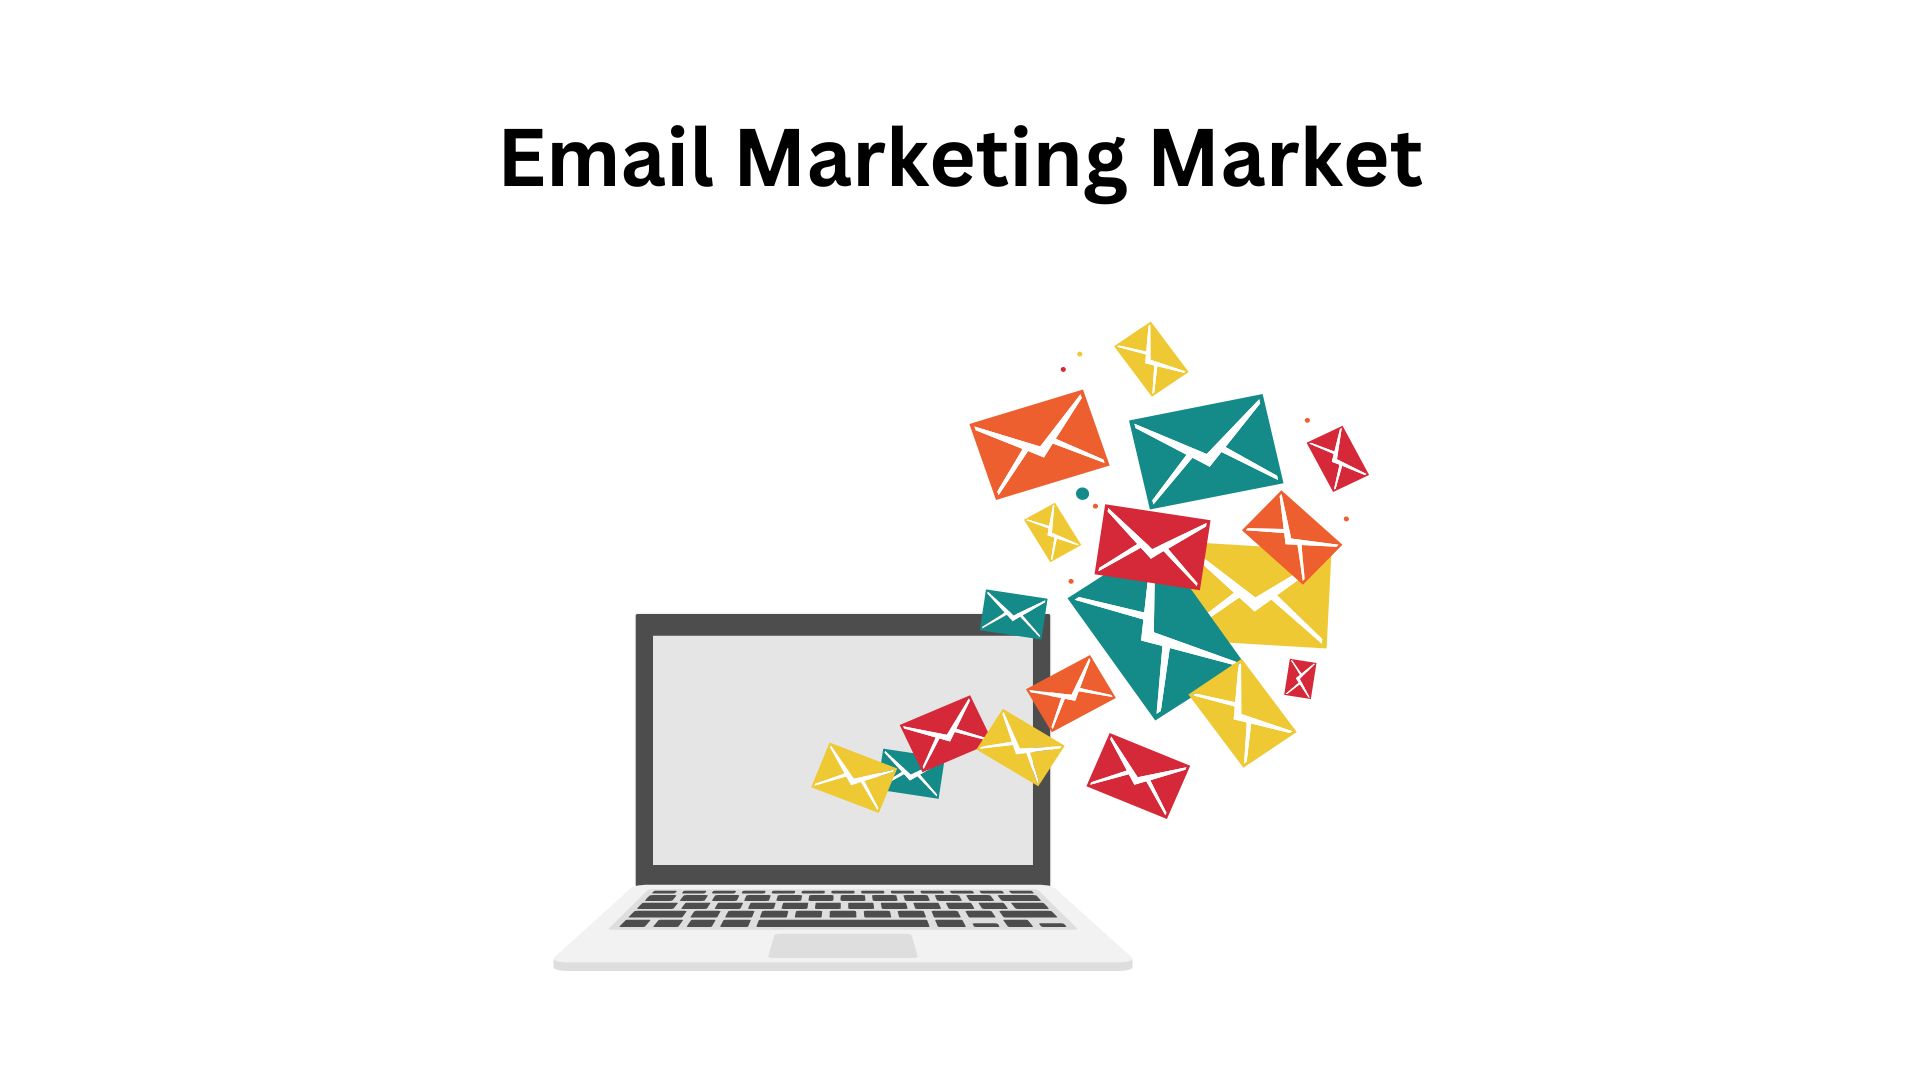 Email Marketing Market To Grow At A Remarkable CAGR Of 14.0%